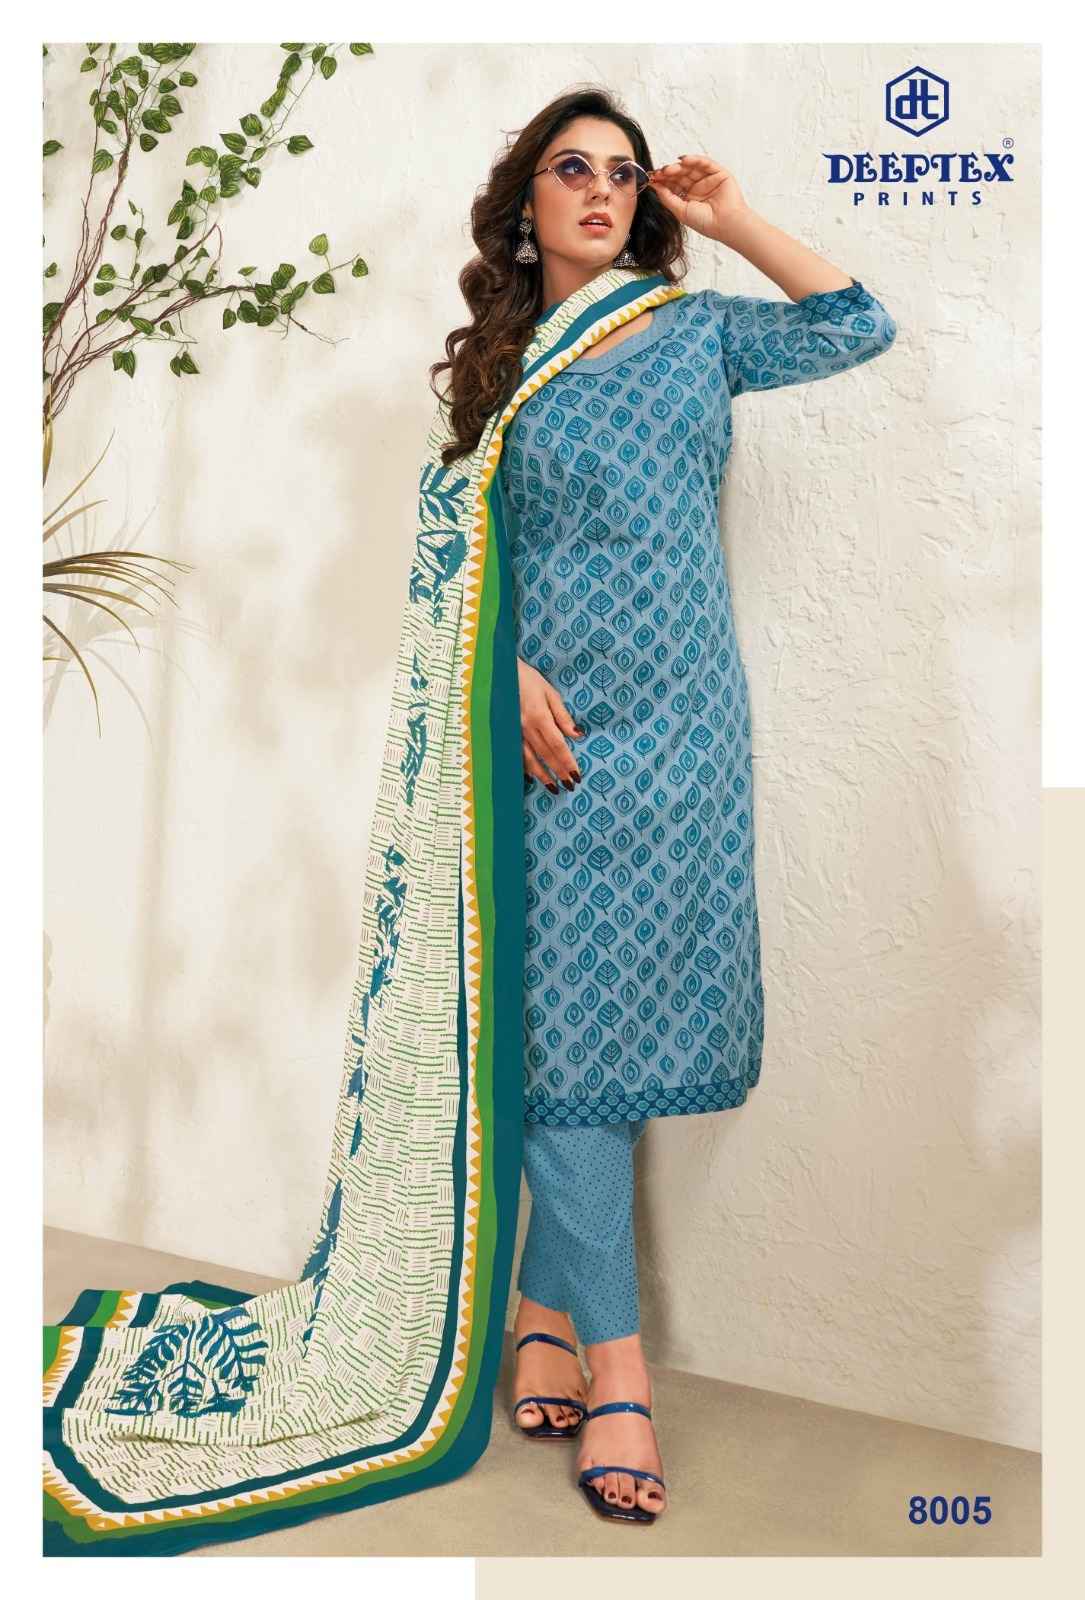 DEEPTEX MISS INDIA VOL 80 SUITS Wholesale Factory Price